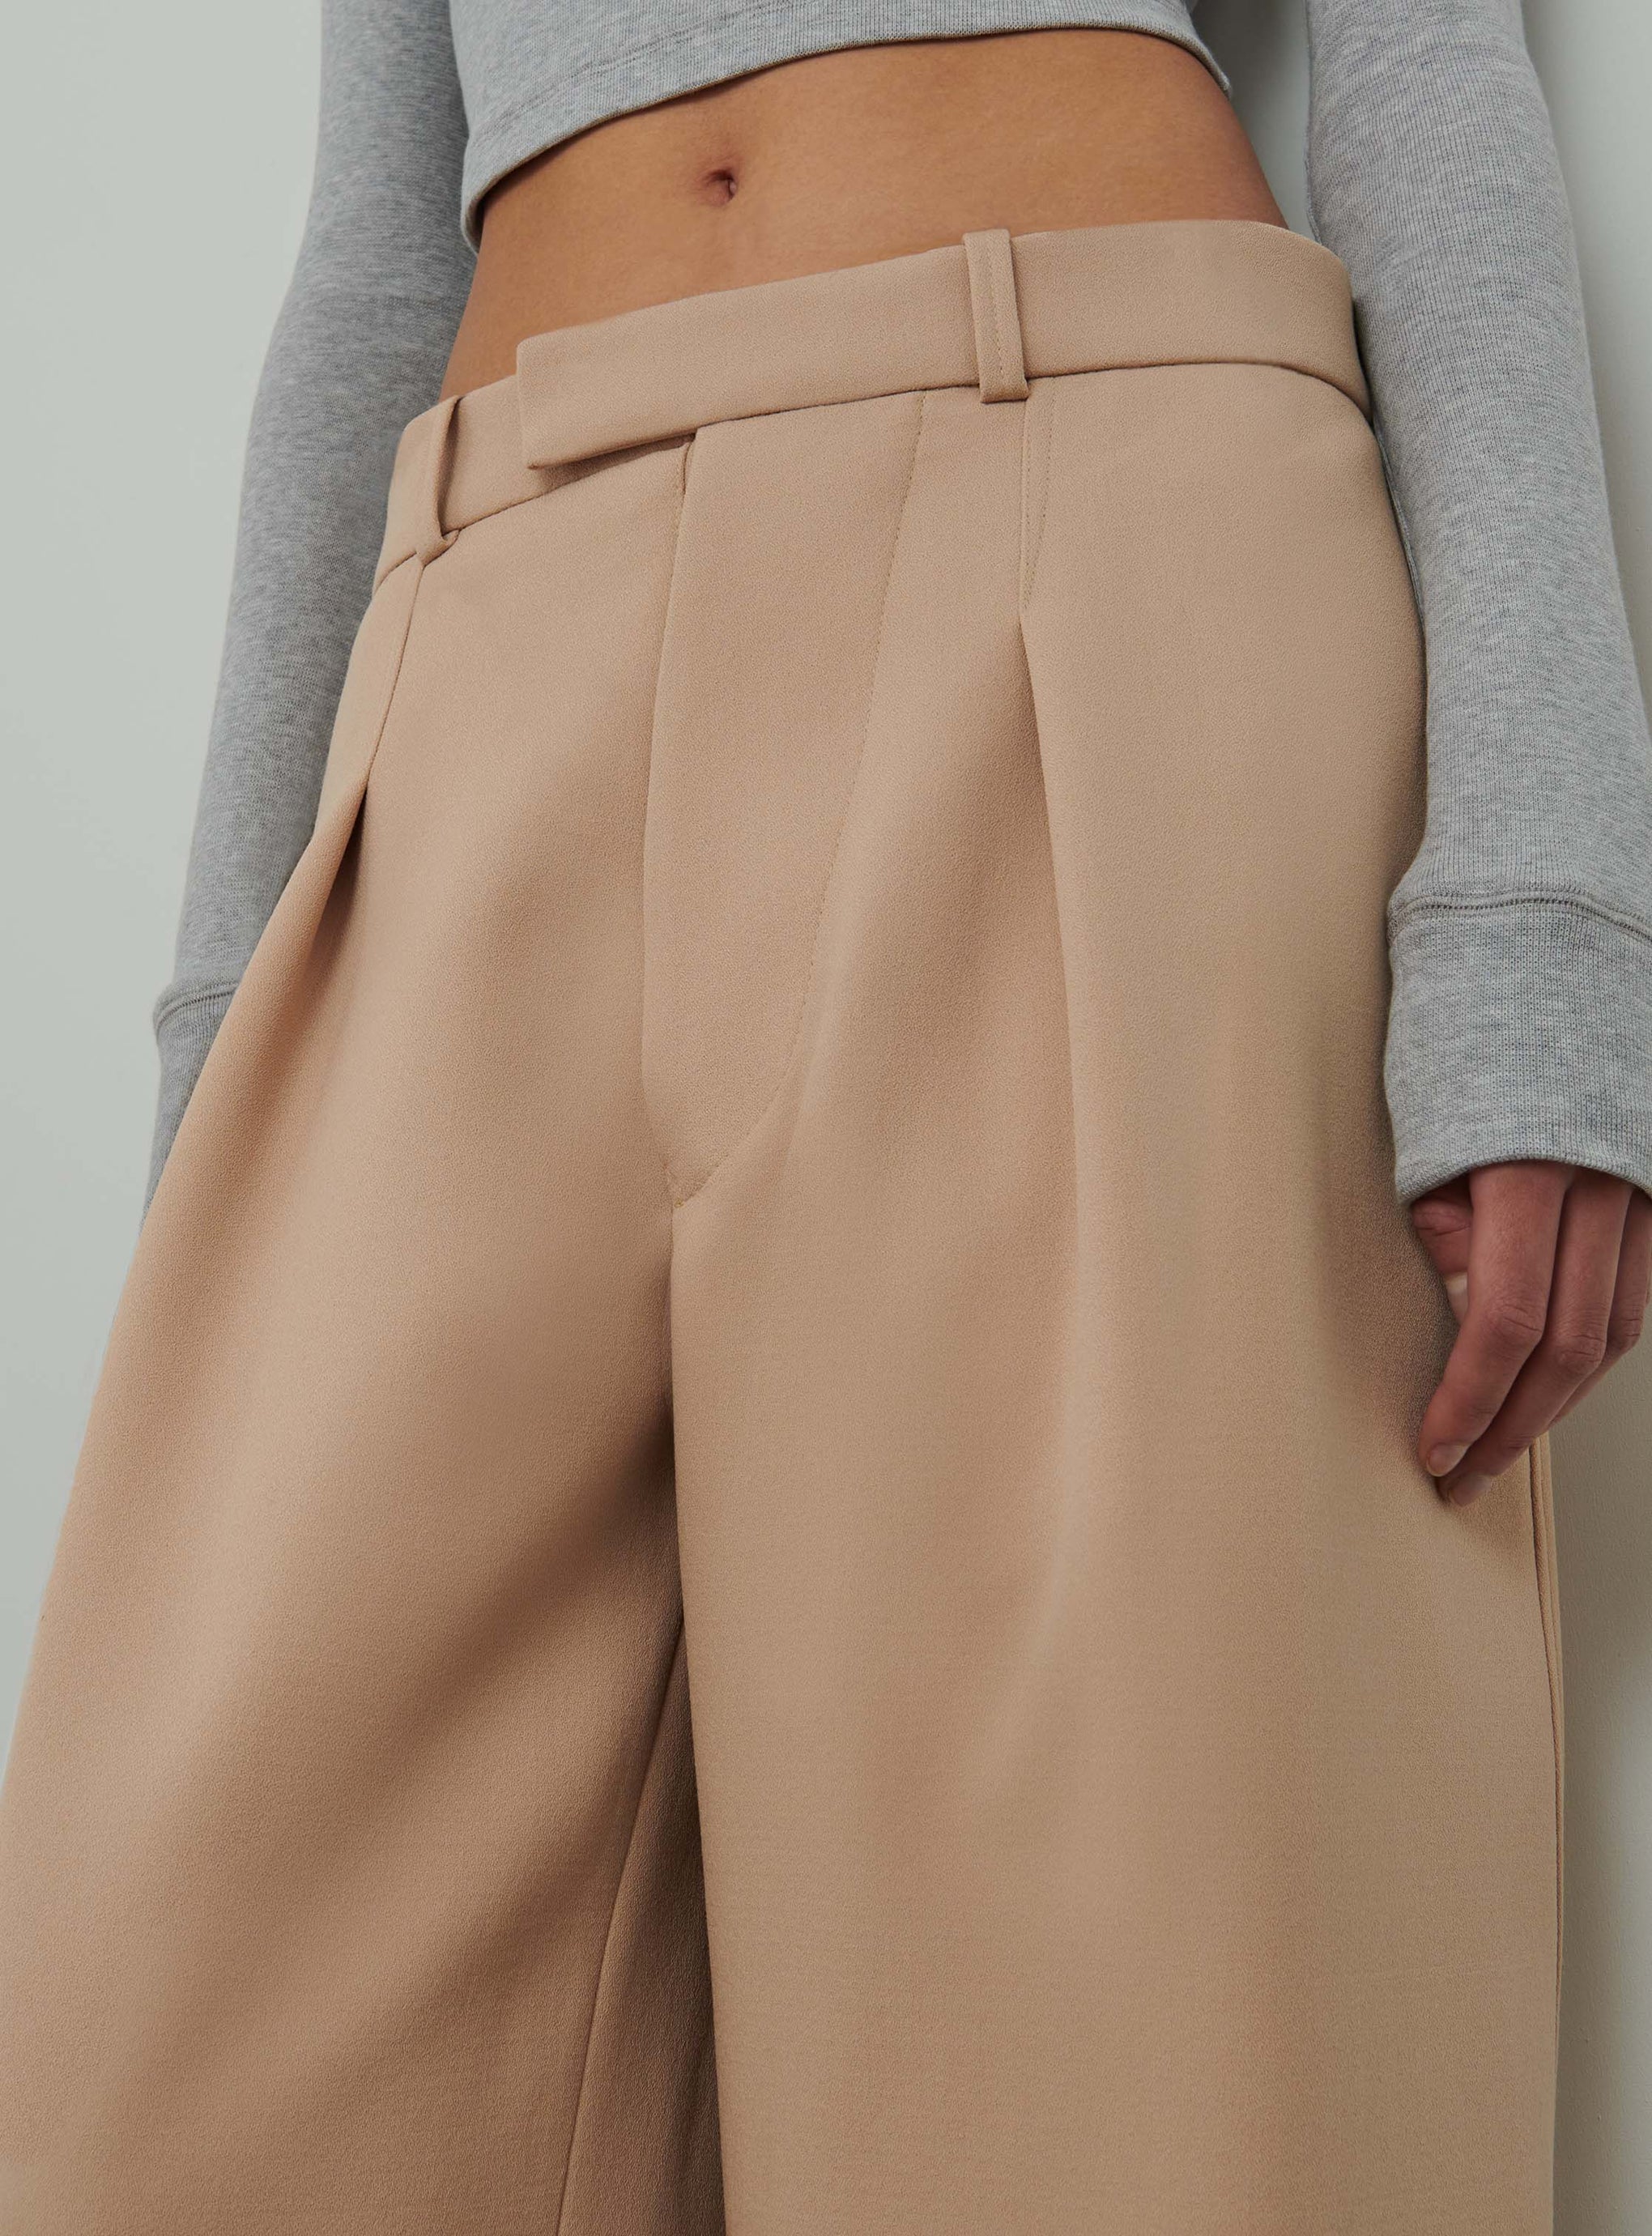 The Wardrobe NYC HB Trouser in Biscuit available at The New Trend Australia